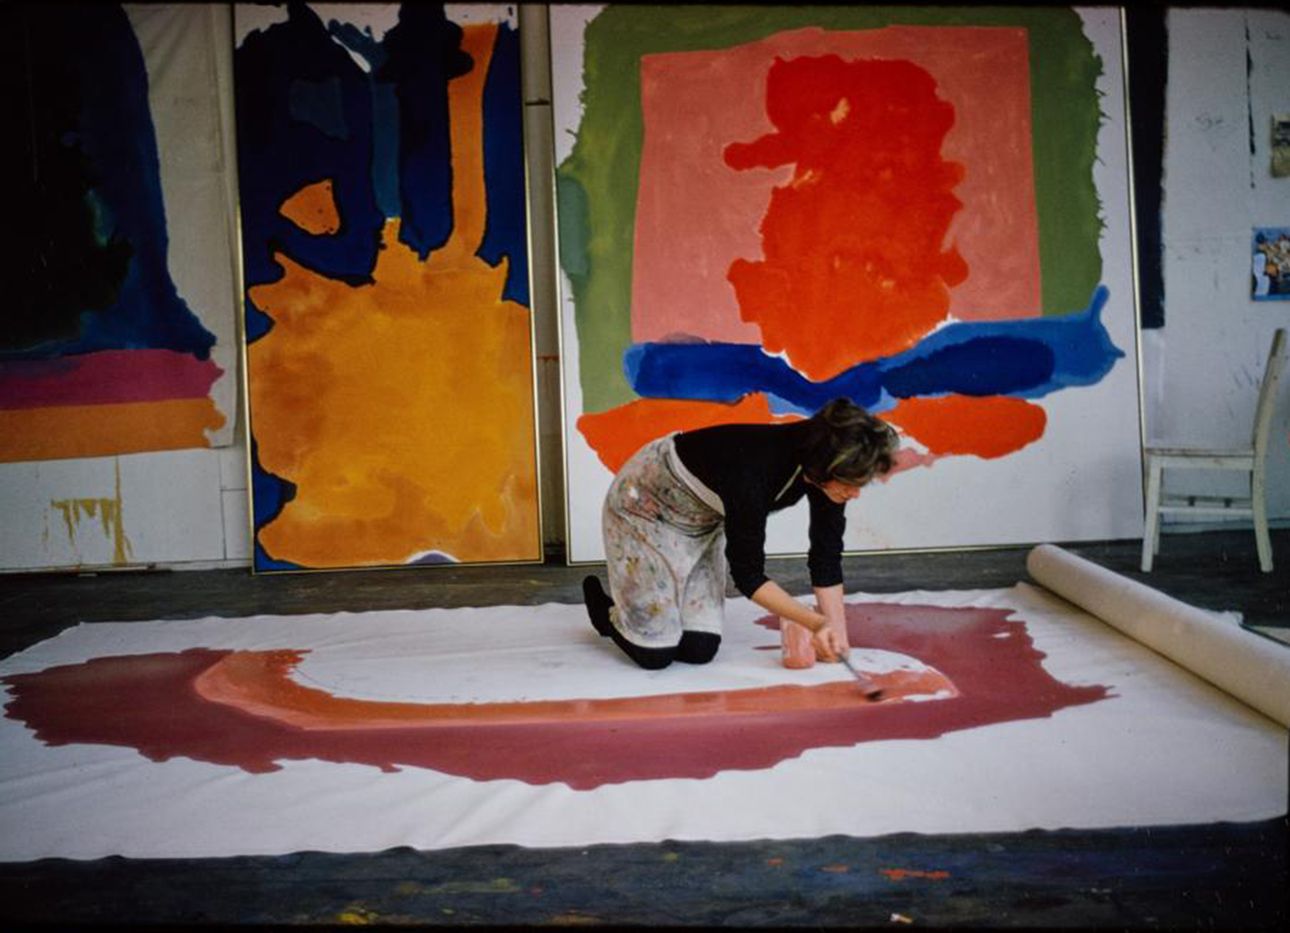 A woman kneels and paints a large rolled canvas on the ground, in front of other paintings lined up on a wall.